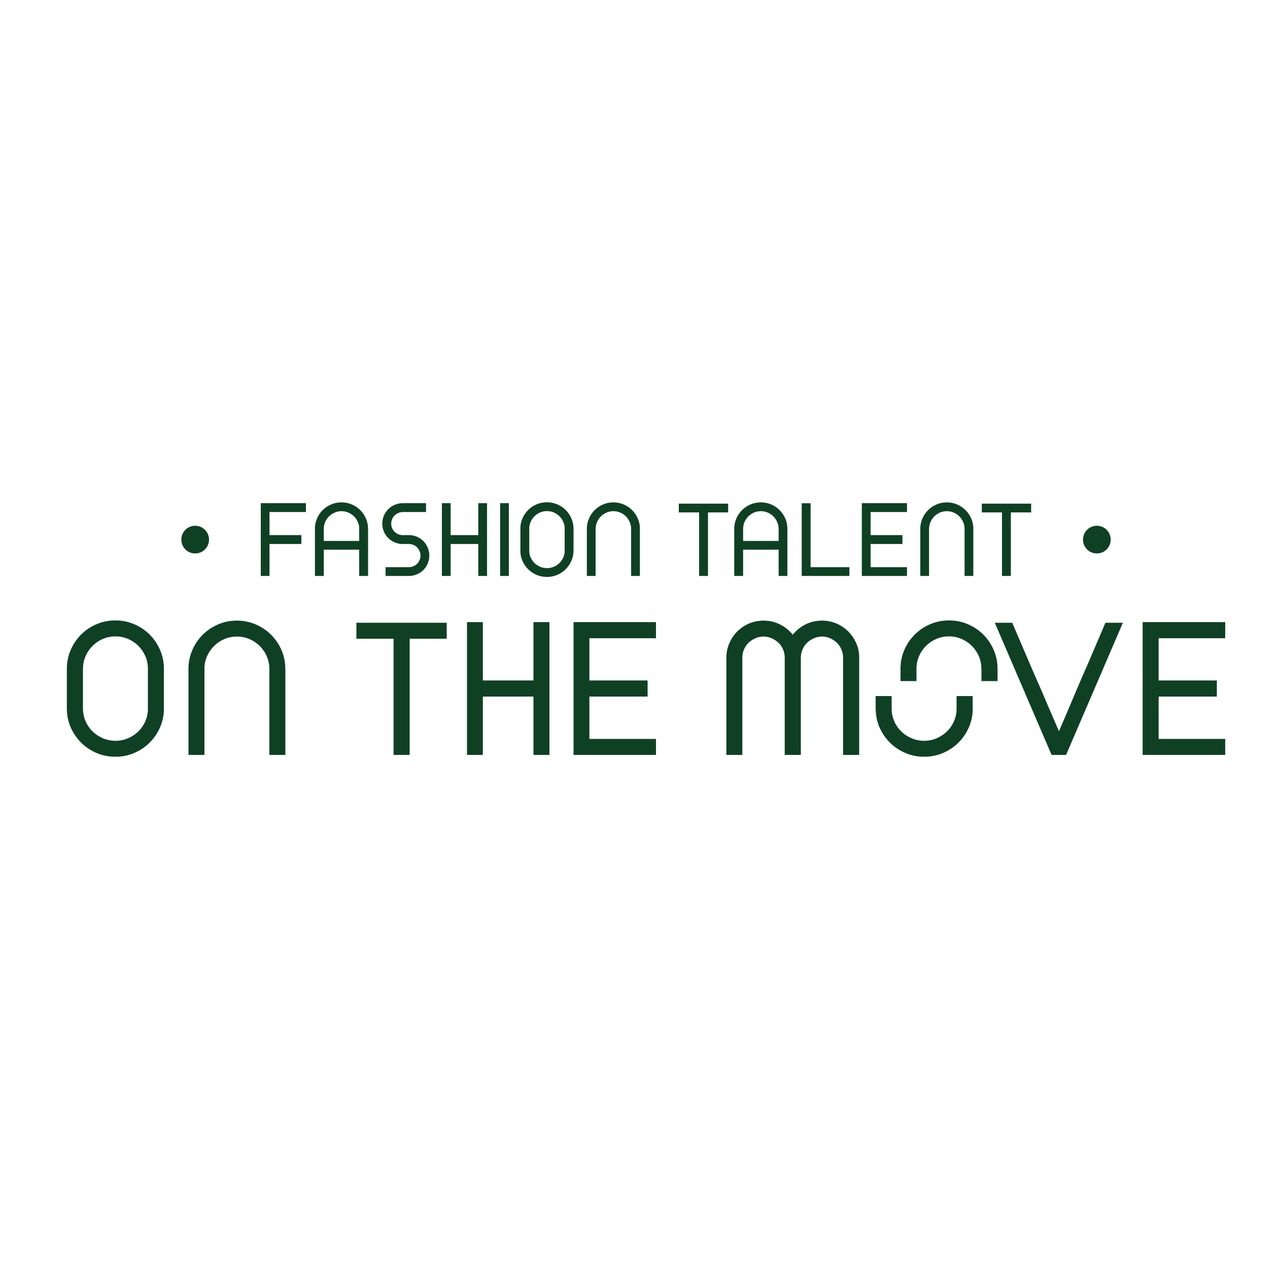 Fashion Talent on the Move - by Jason Brown